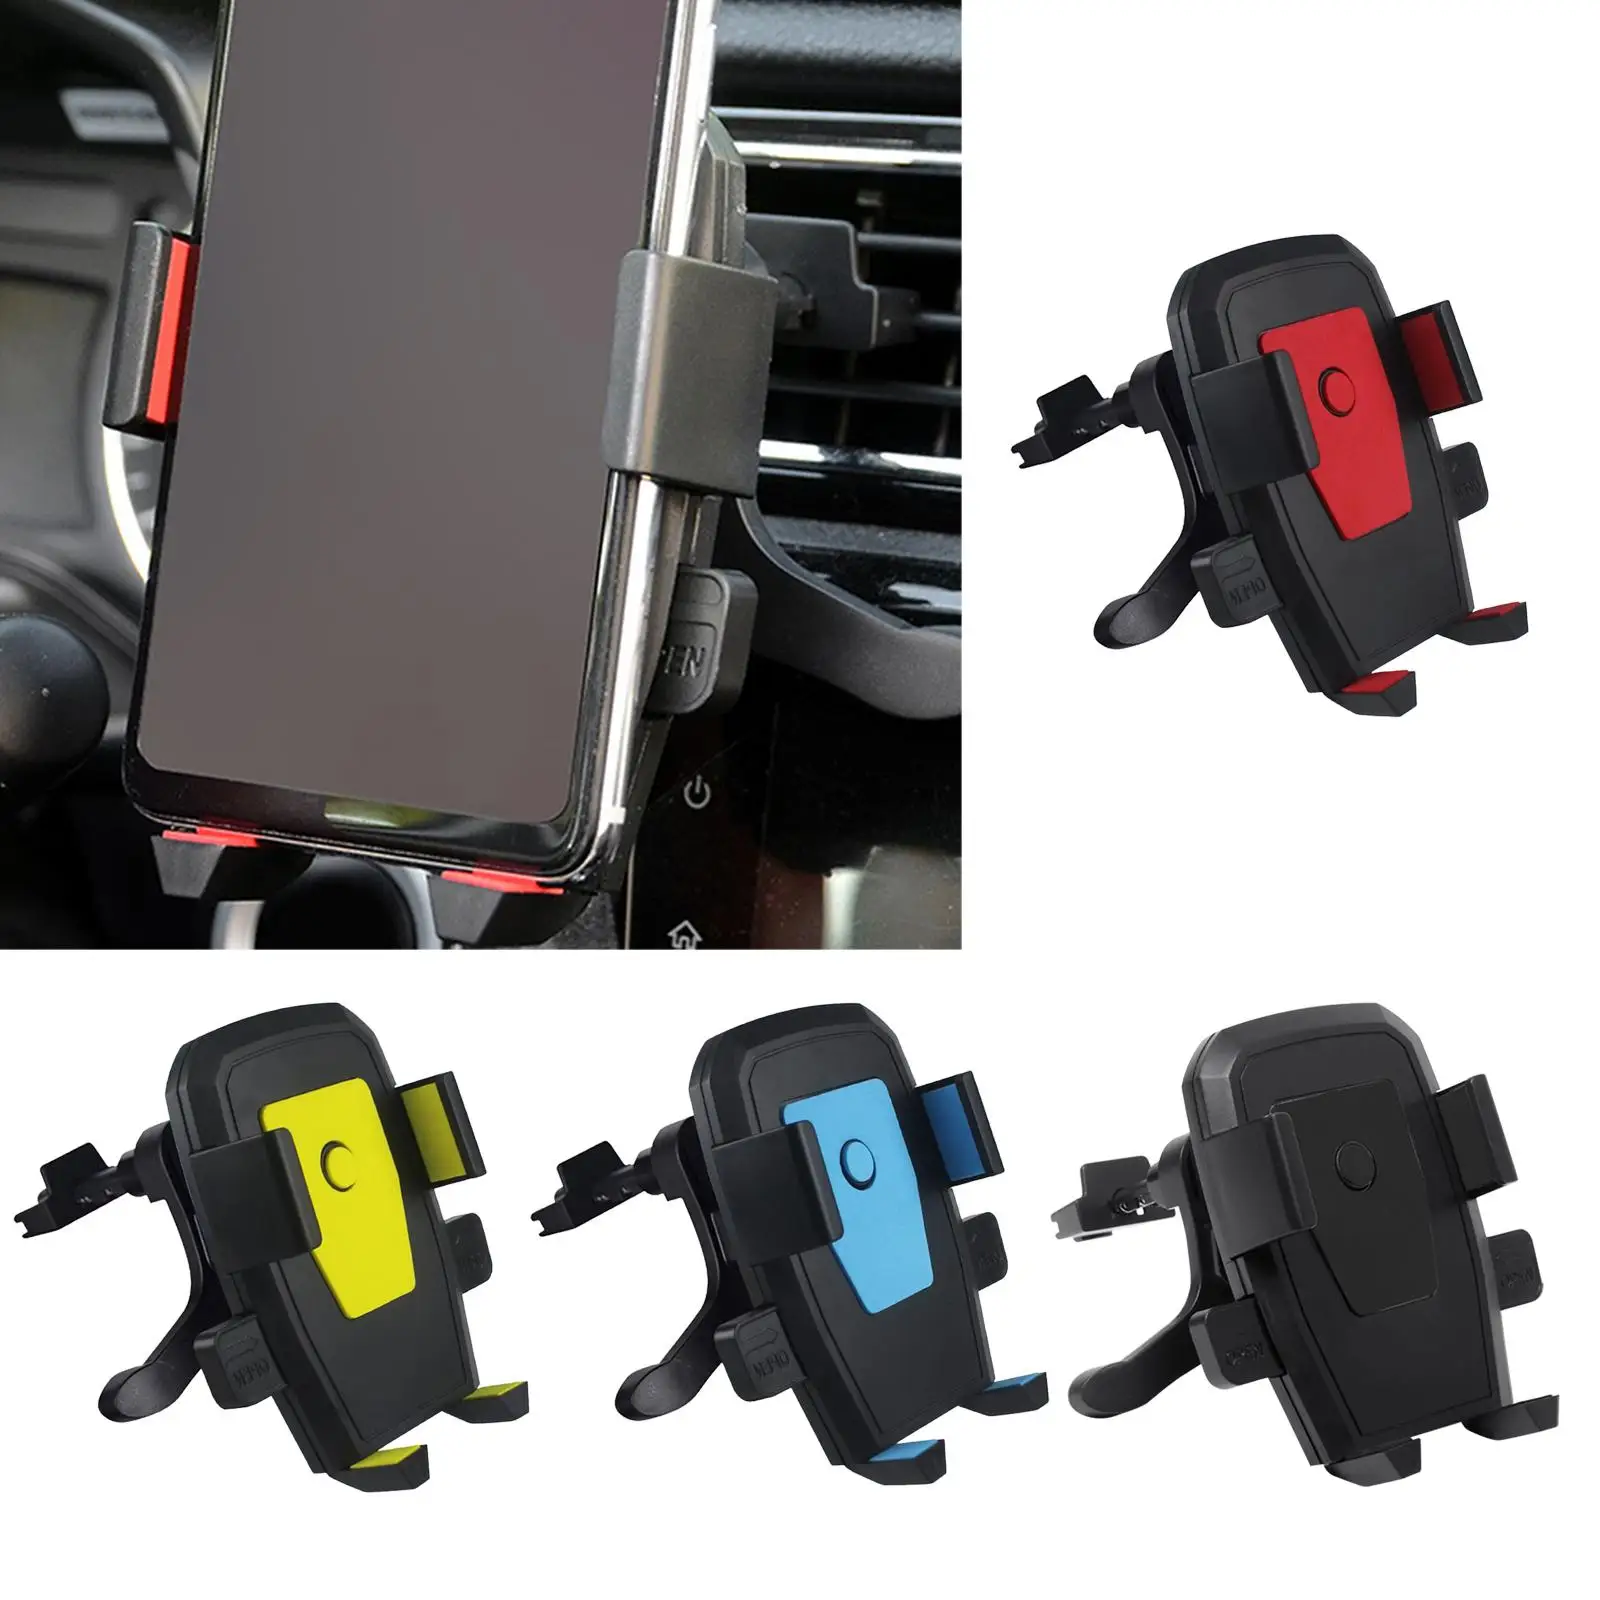 Vent Phone Holder for Car, Durable Multiple Viewing Angle Adjustable